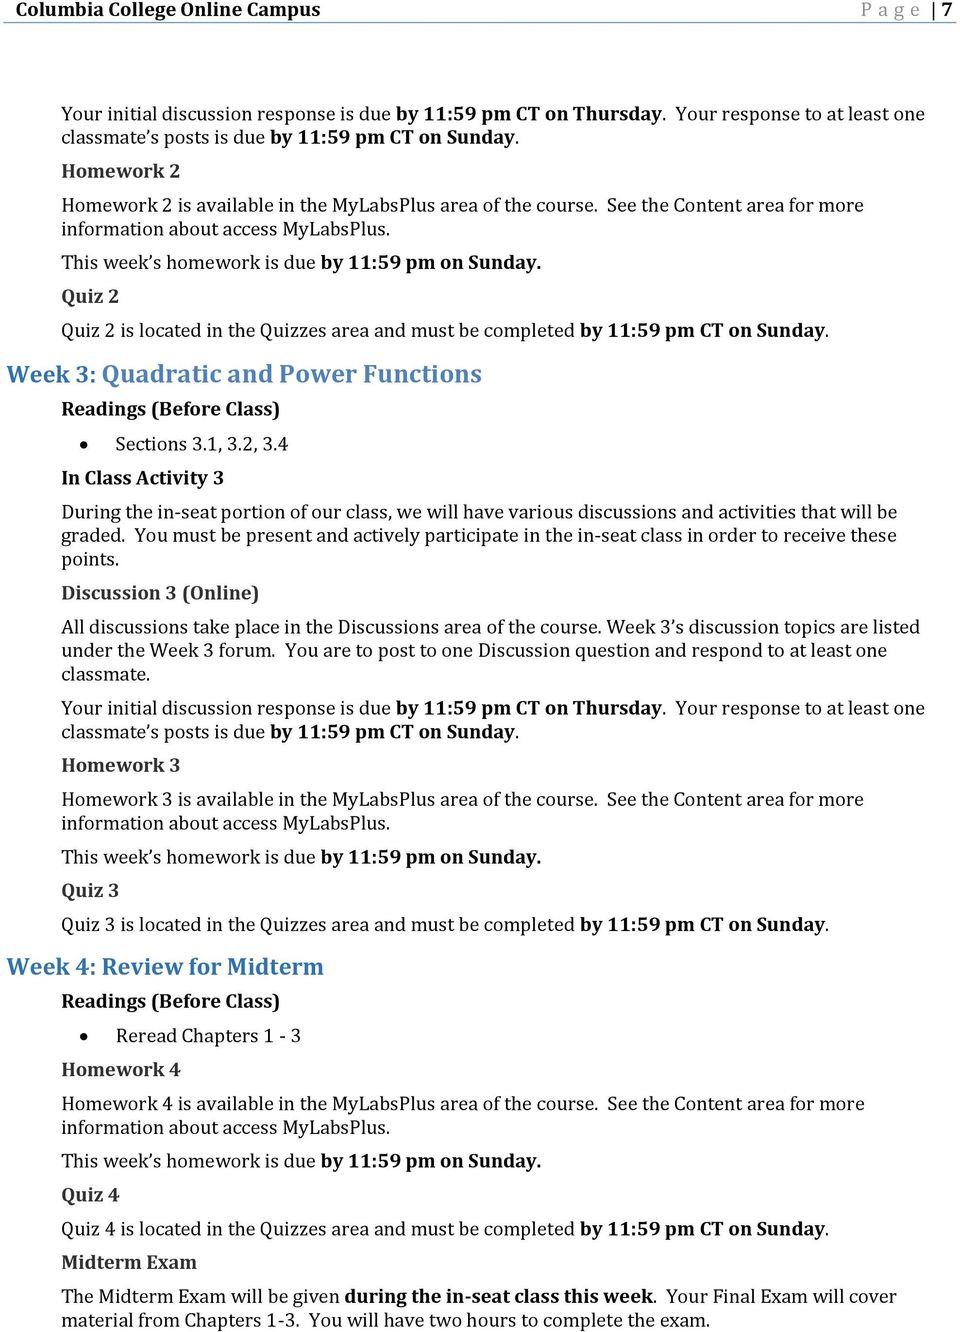 Week 3: Quadratic and Power Functions Sections 3.1, 3.2, 3.4 In Class Activity 3 Discussion 3 (Online) All discussions take place in the Discussions area of the course.